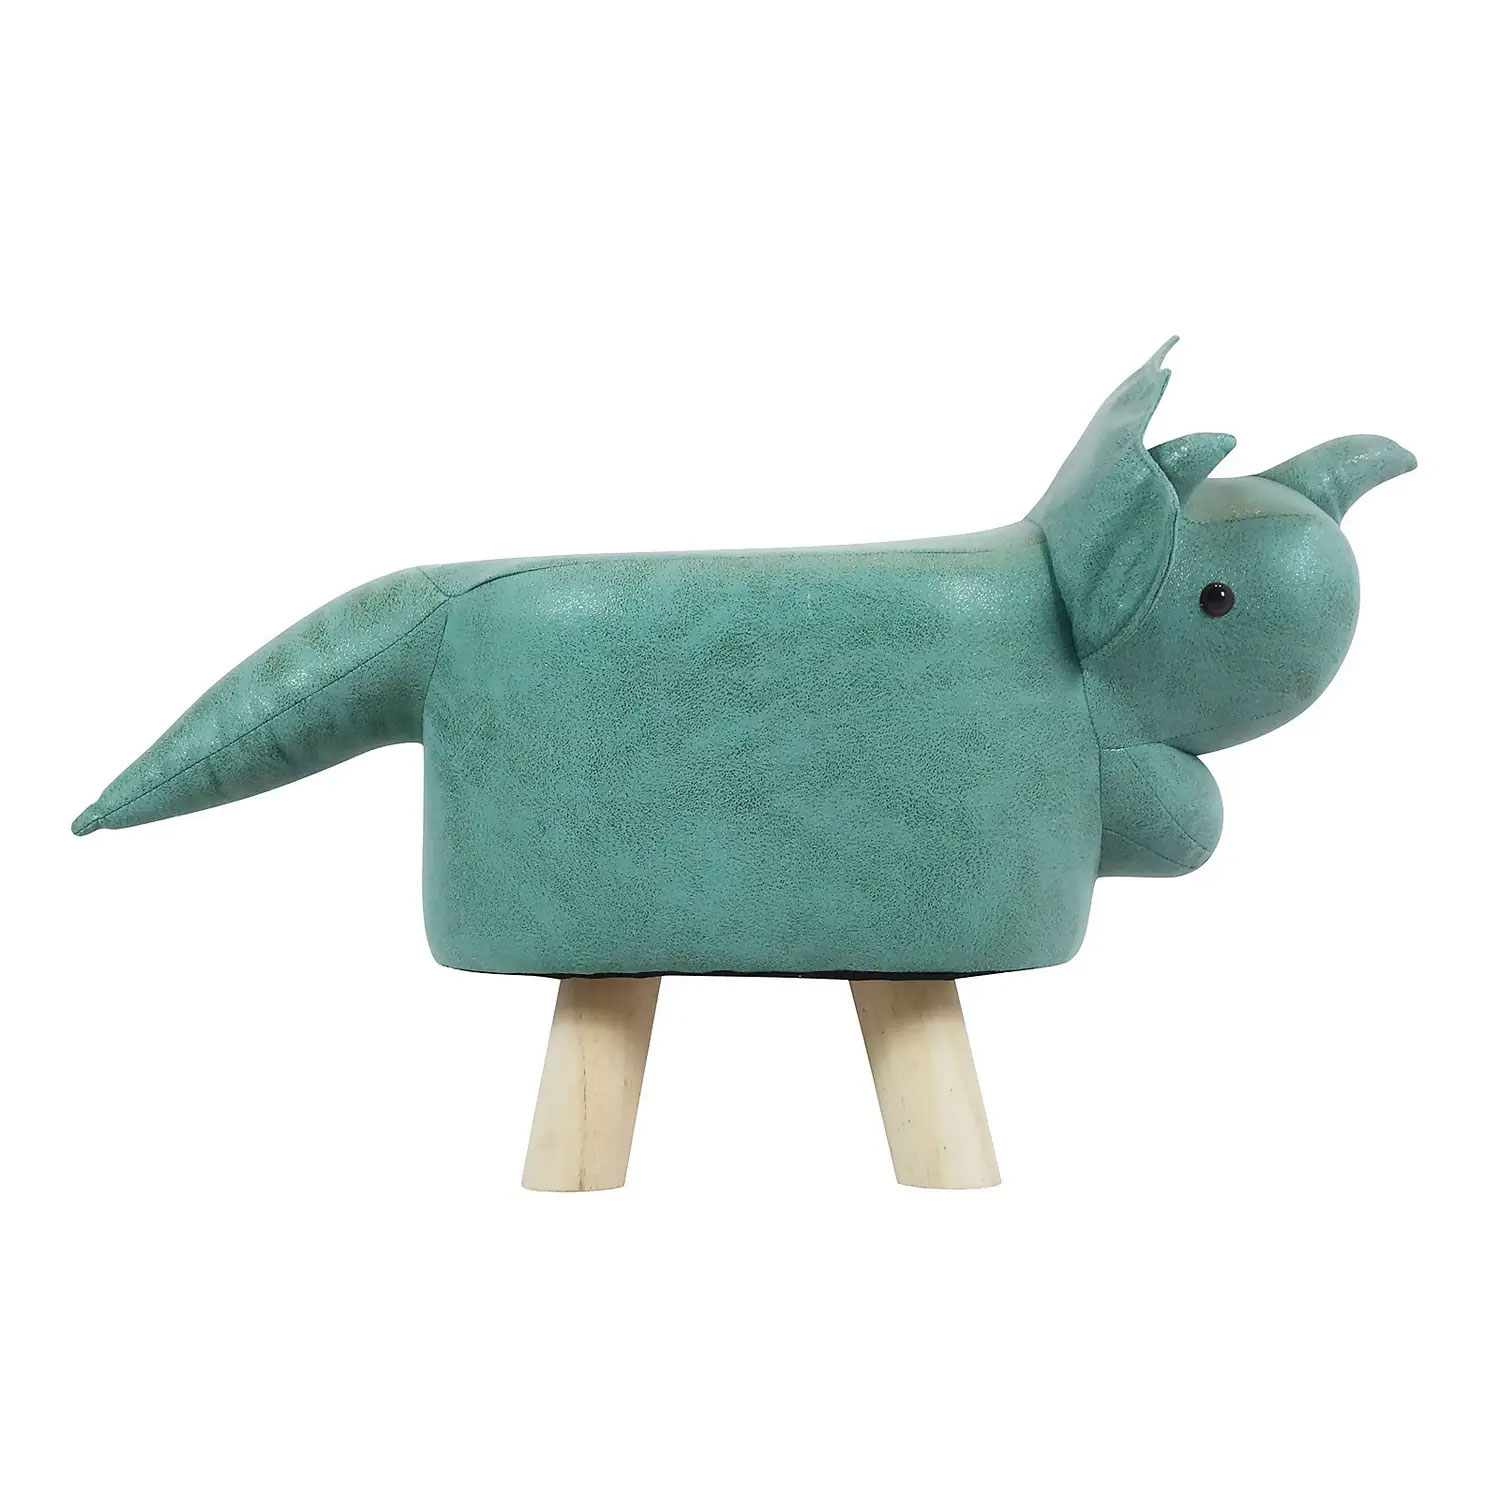 View the best prices for: dana the dino childrens stool